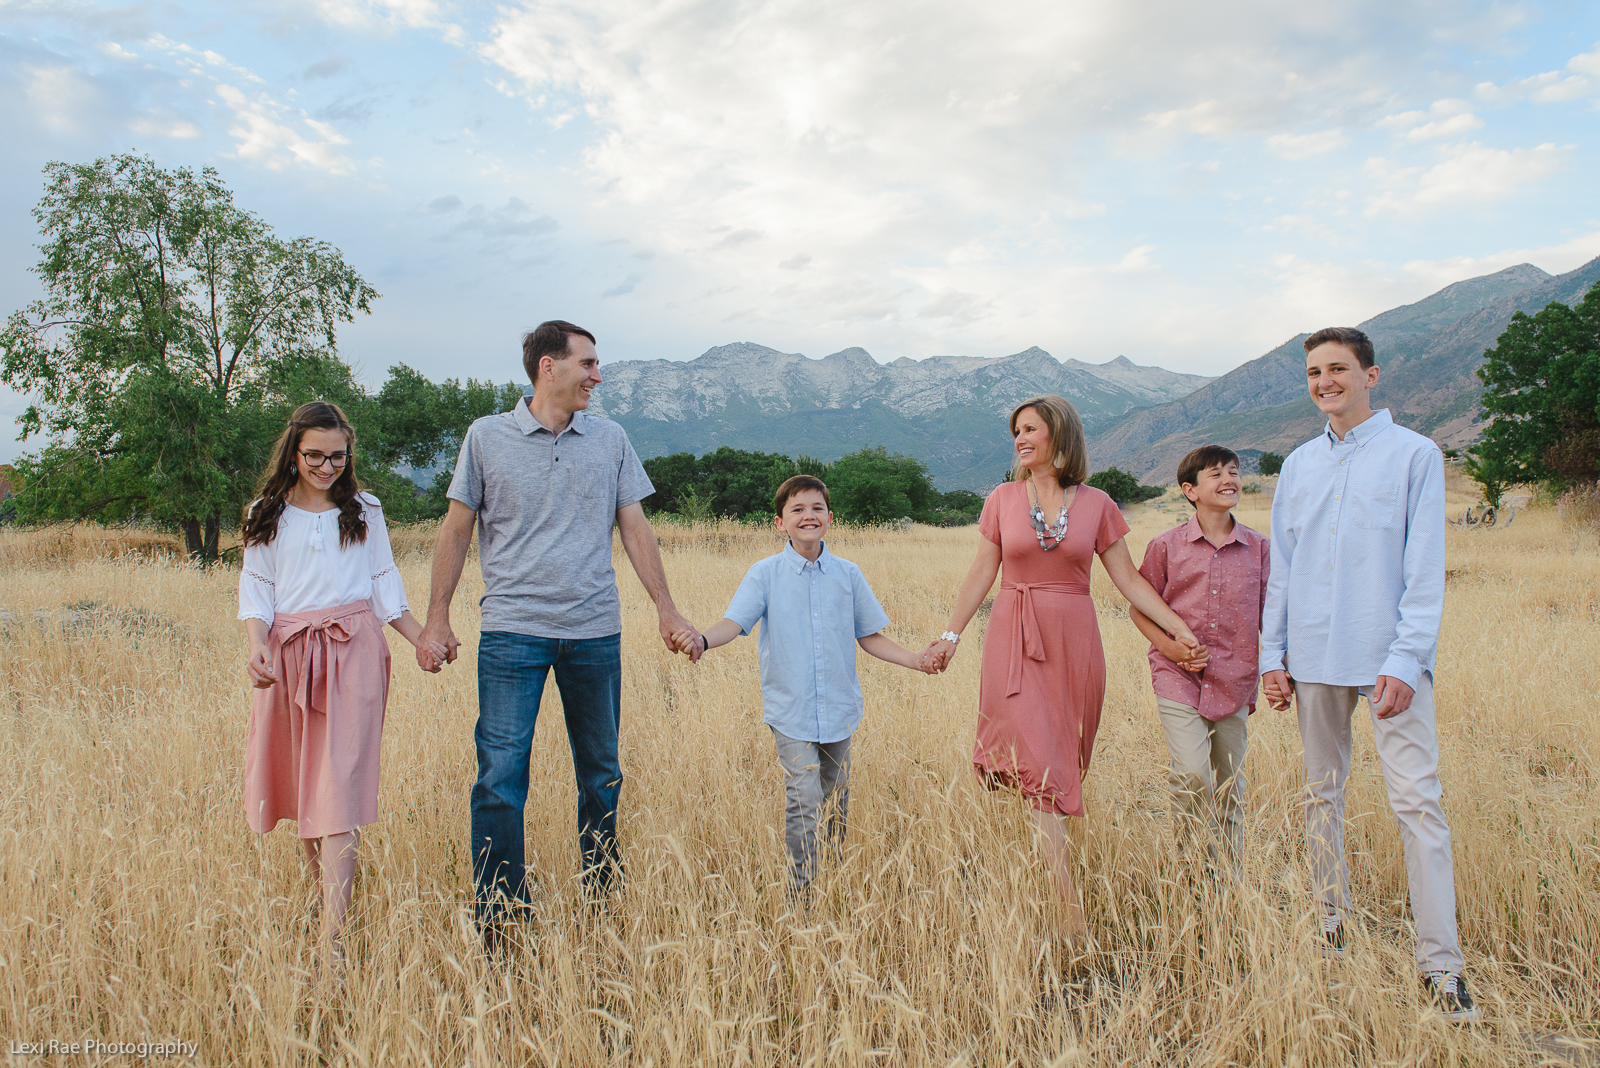 What to Expect from your Extended Family Photography Shoot in Utah